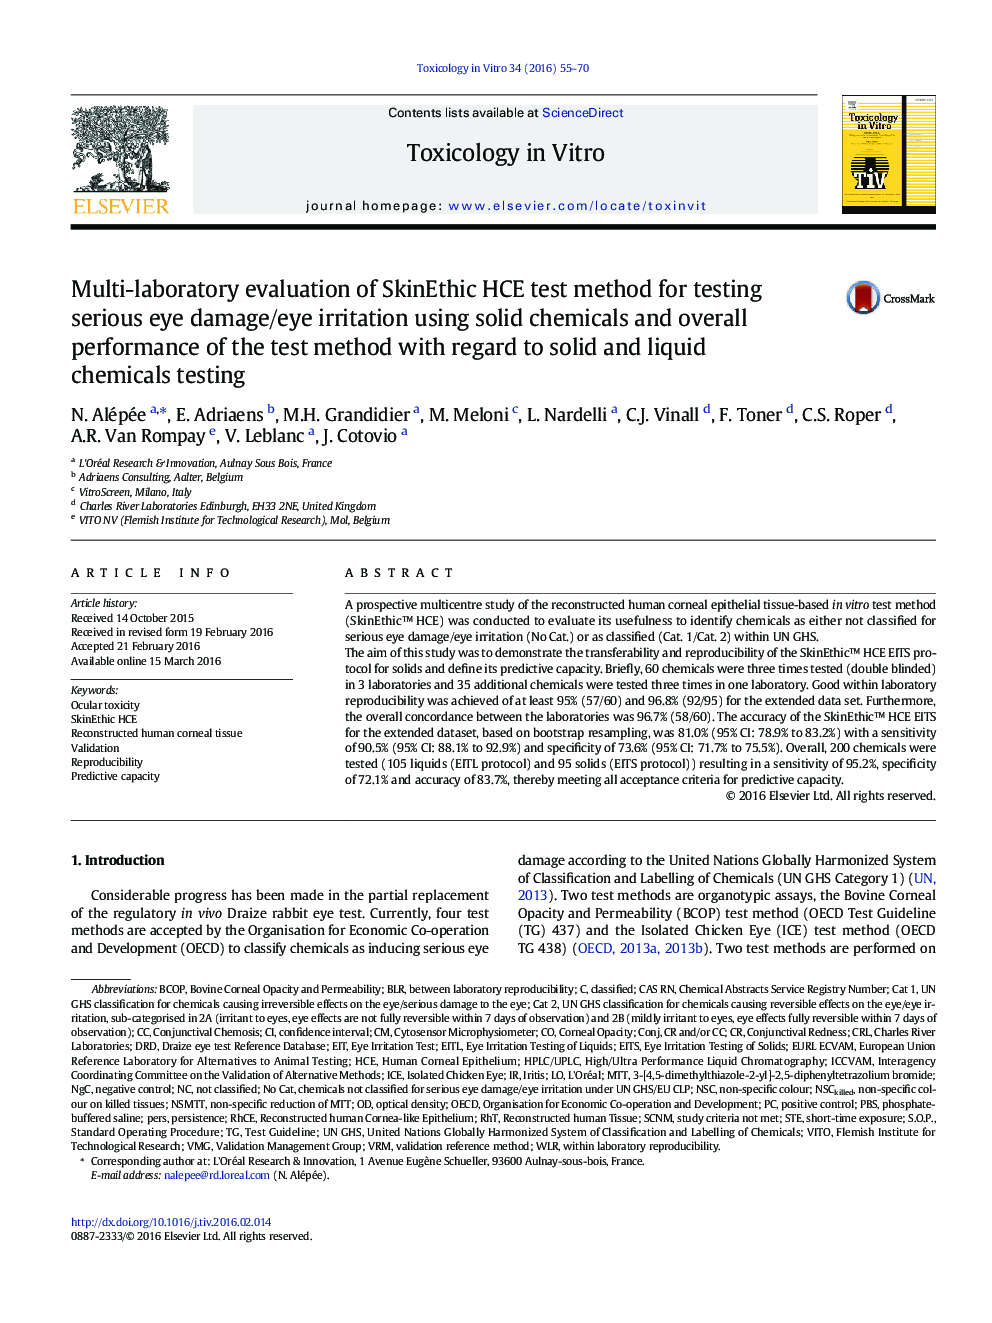 Multi-laboratory evaluation of SkinEthic HCE test method for testing serious eye damage/eye irritation using solid chemicals and overall performance of the test method with regard to solid and liquid chemicals testing